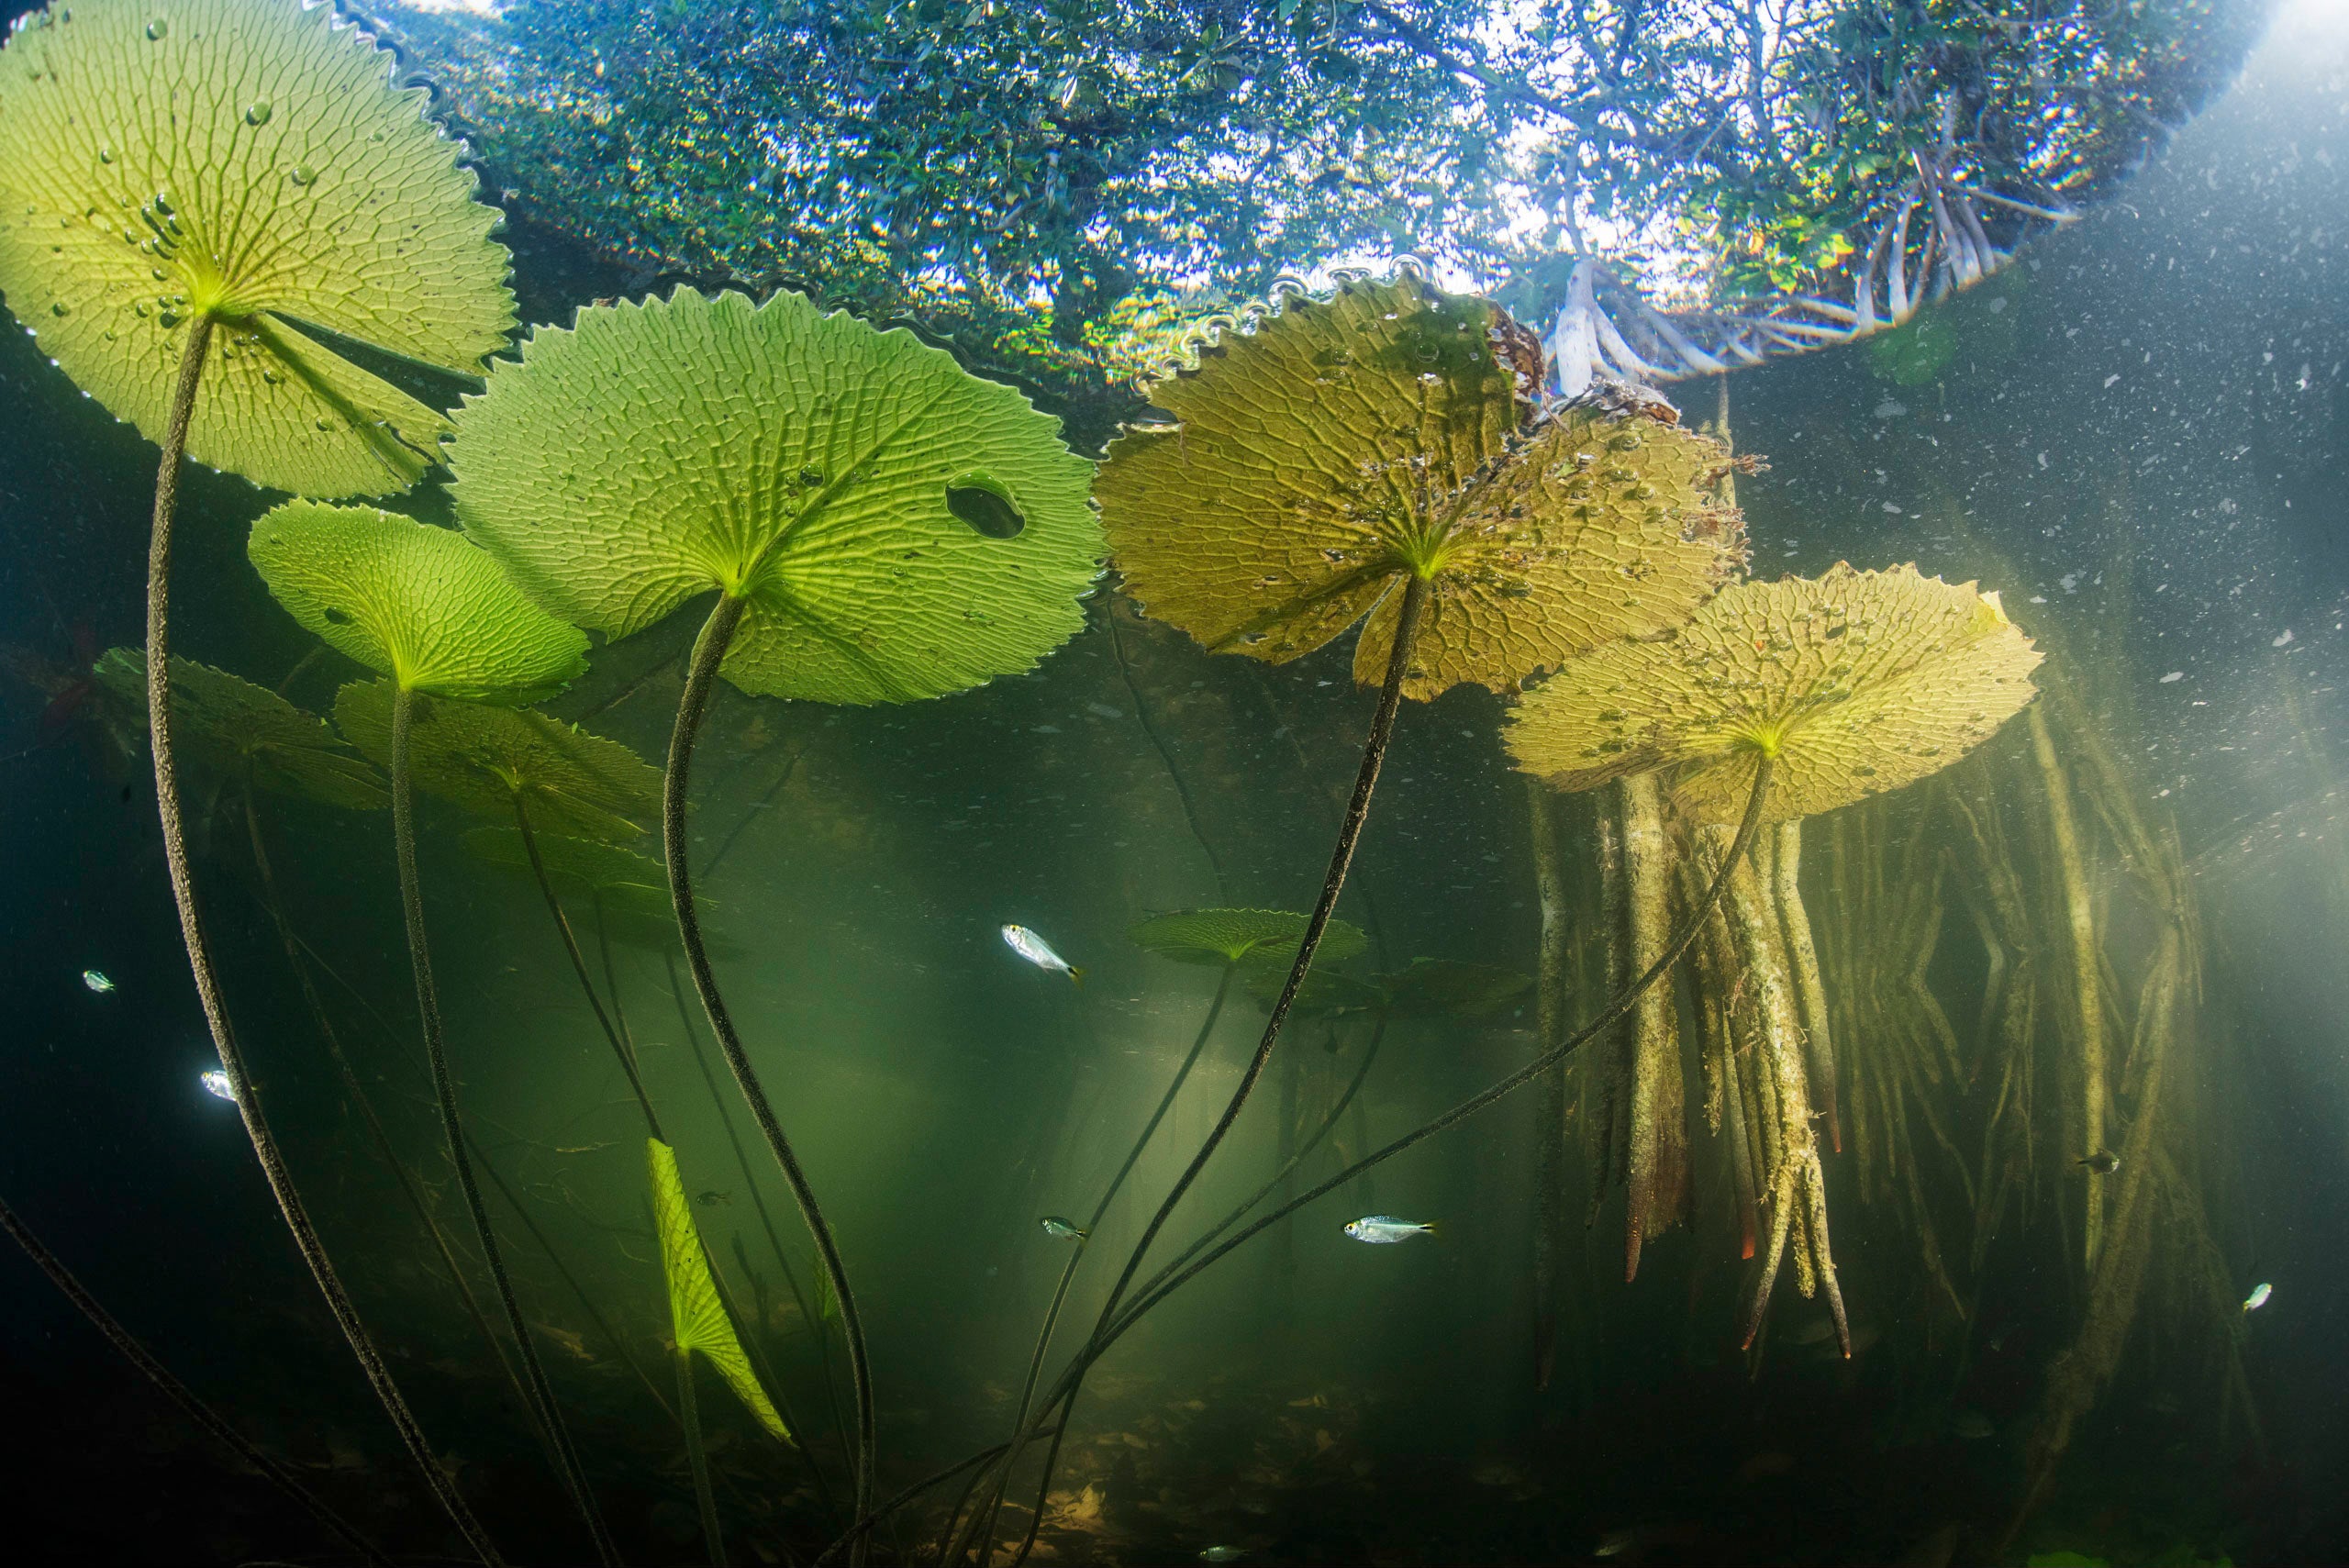 Lilypads in the mangrove forest, where many plants typically found in marine environments now live. (Photo: Octavio Aburto)